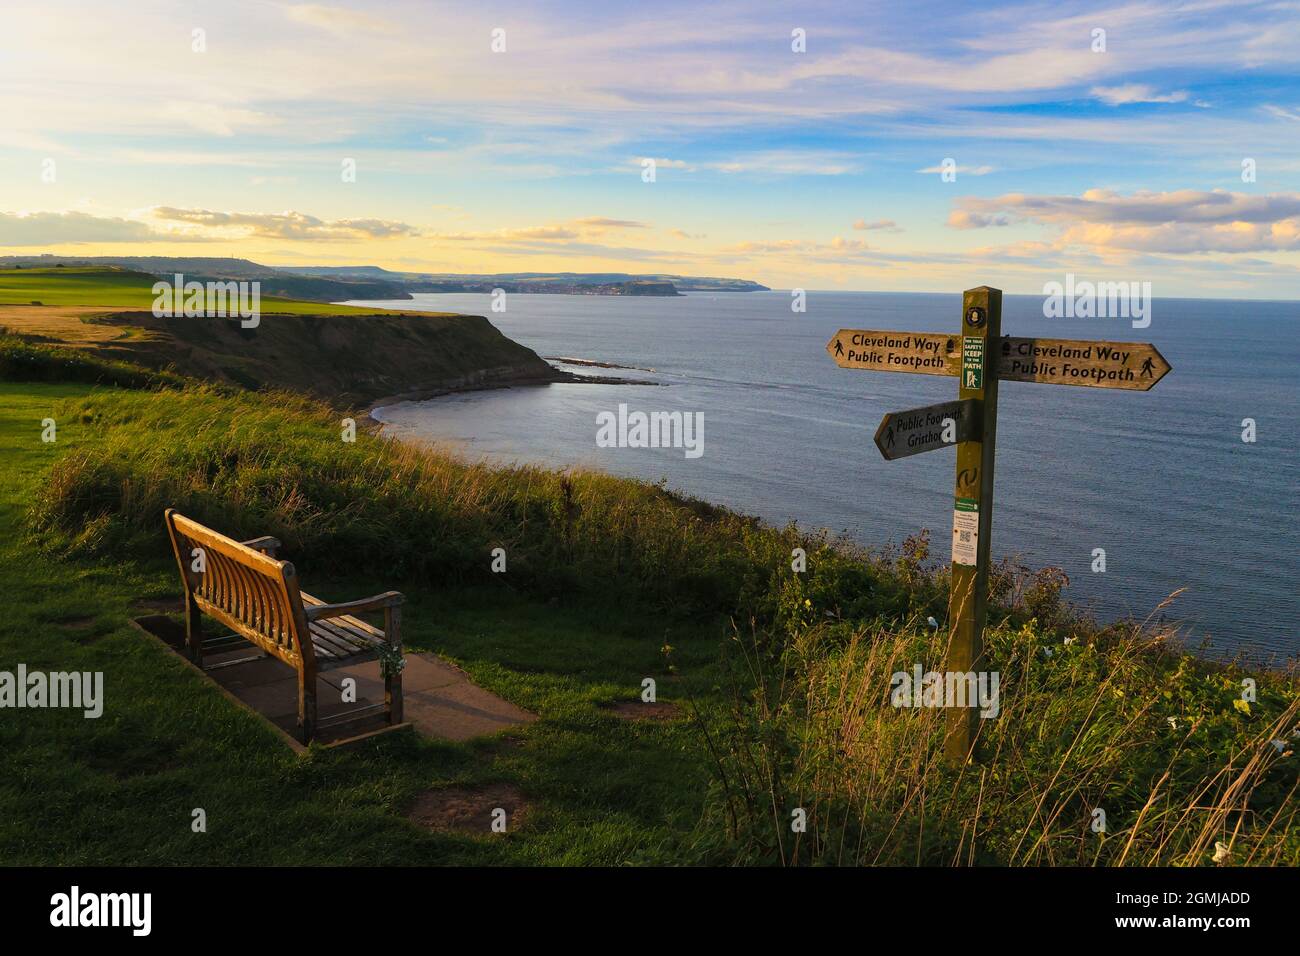 Cleveland Way  with Scarborough in the distance looking out over the sea. Stock Photo